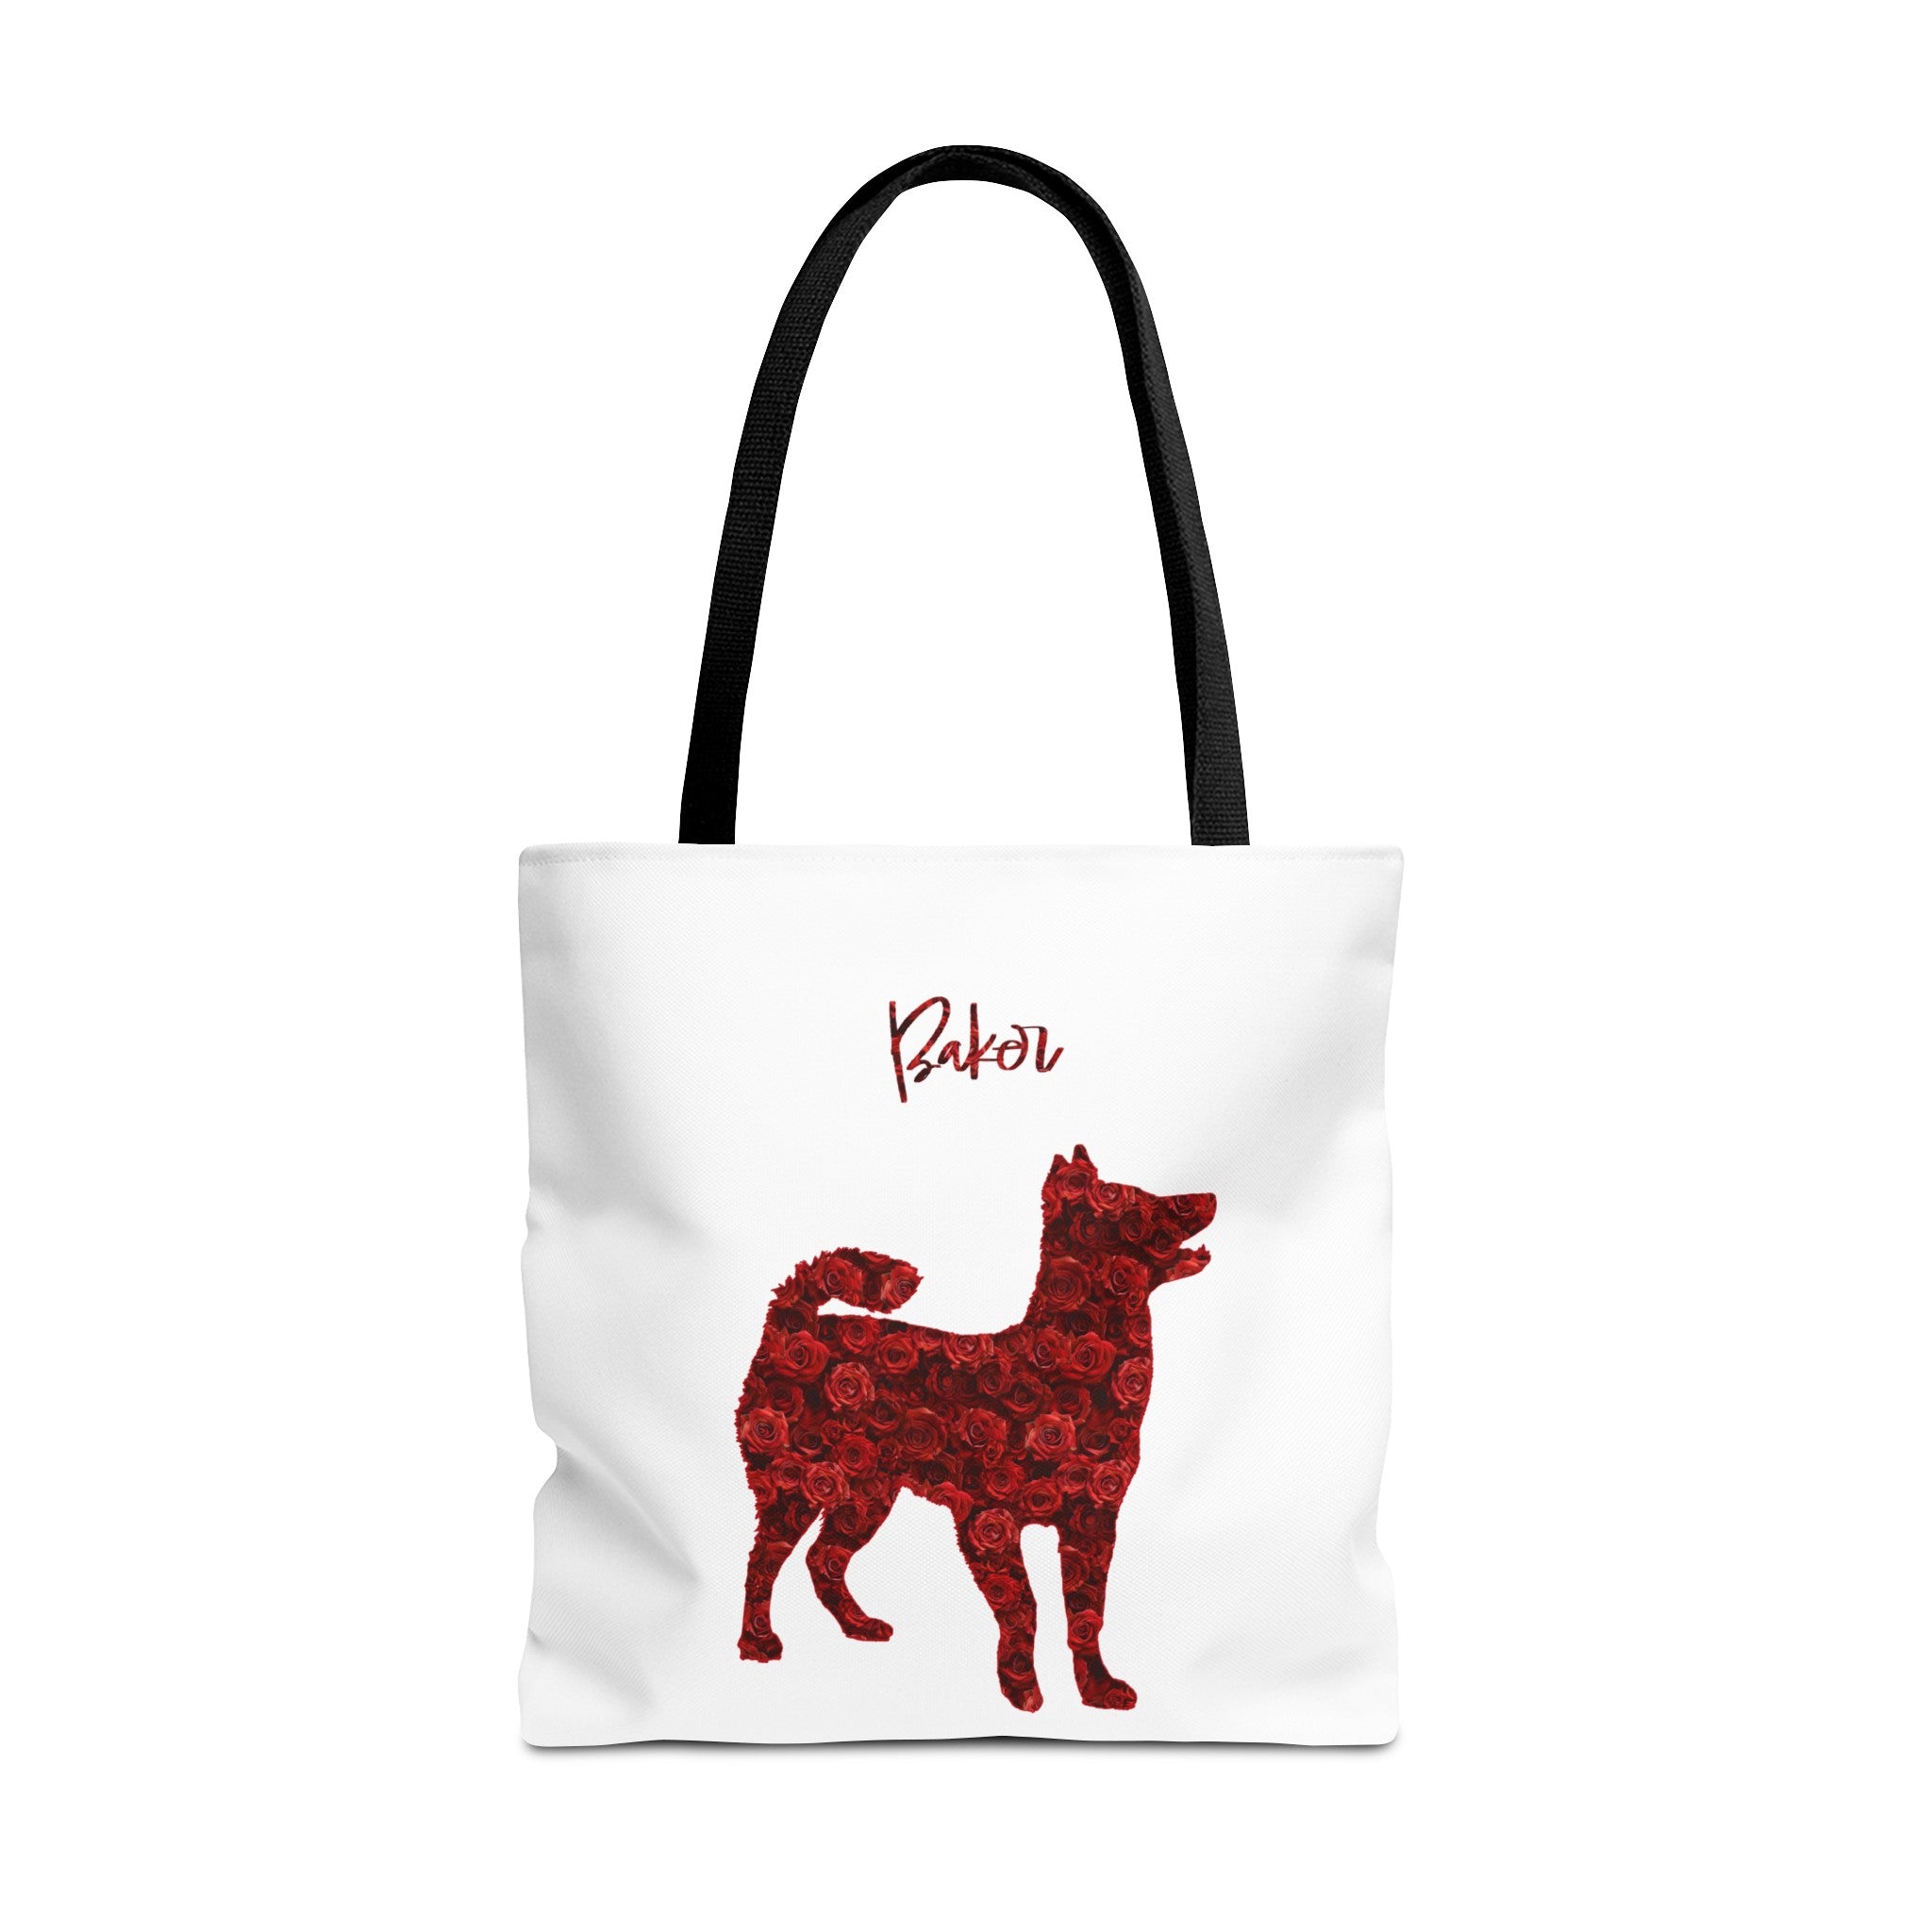 Personalized Red Rose Dog Silhouette Flower Art Tote Bag - Upload Your Photo - personalized-red-rose-dog-silhouette-flower-art-tote